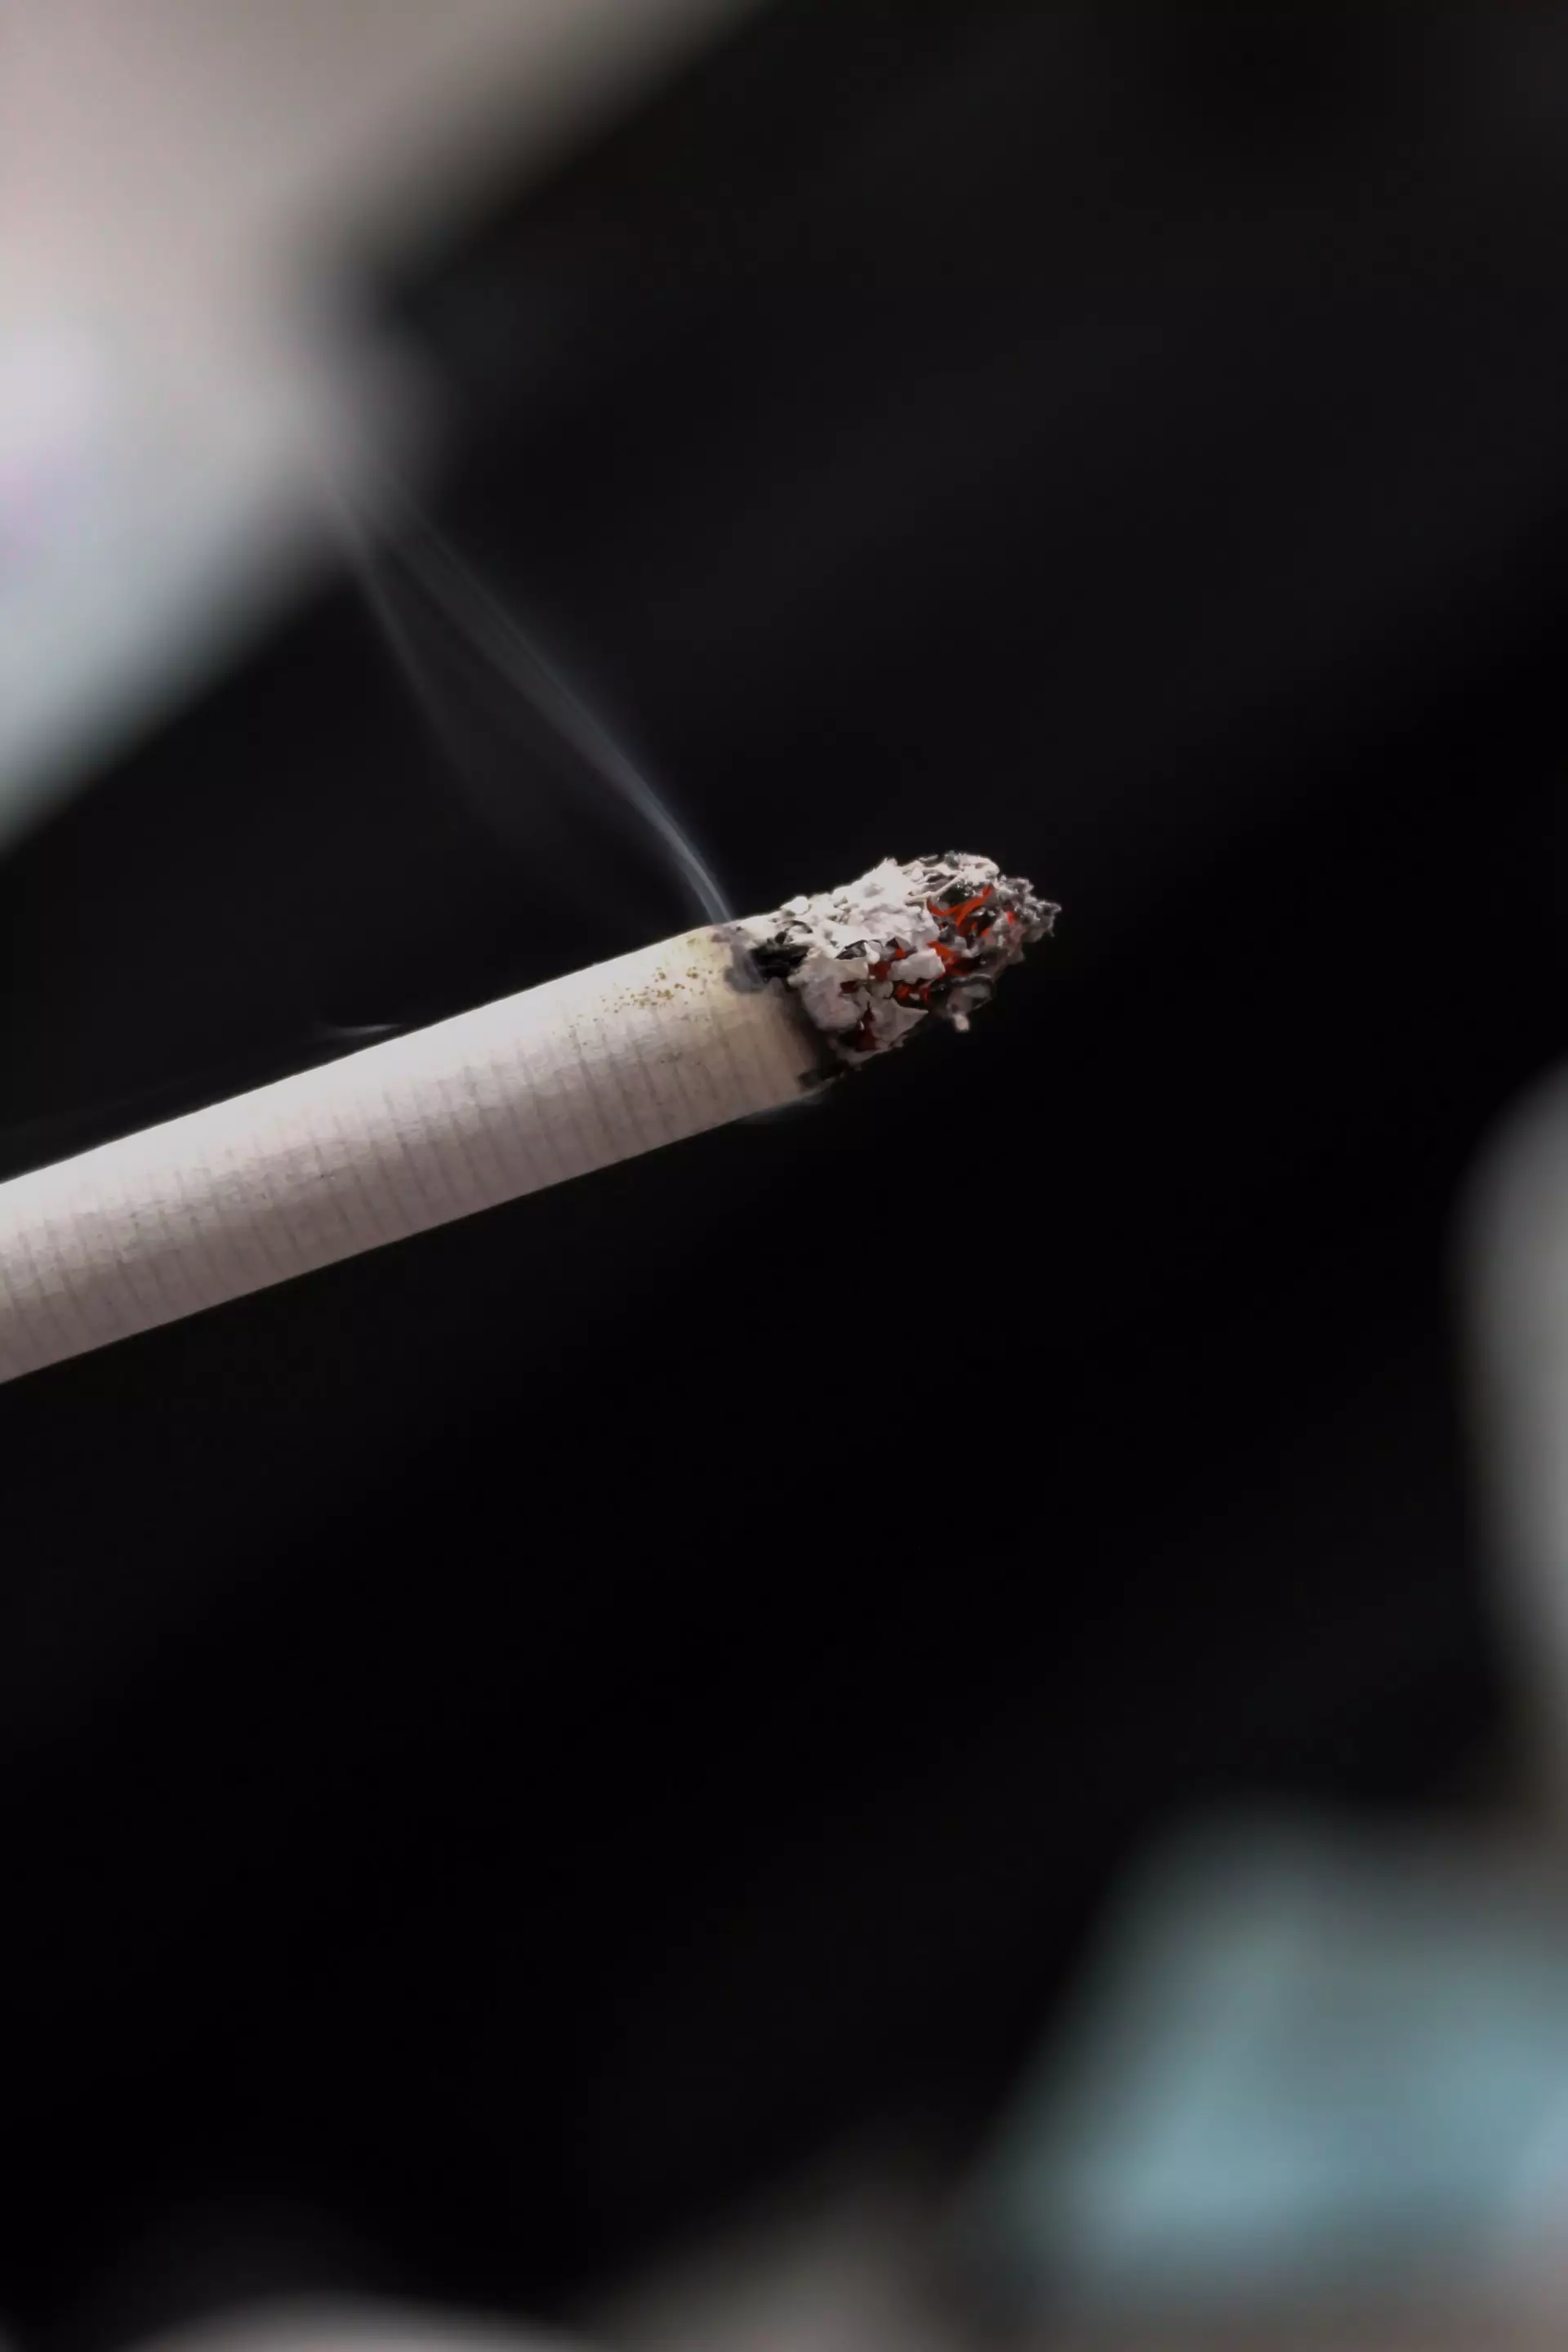 Smoking is the leading cause of premature death in the UK (